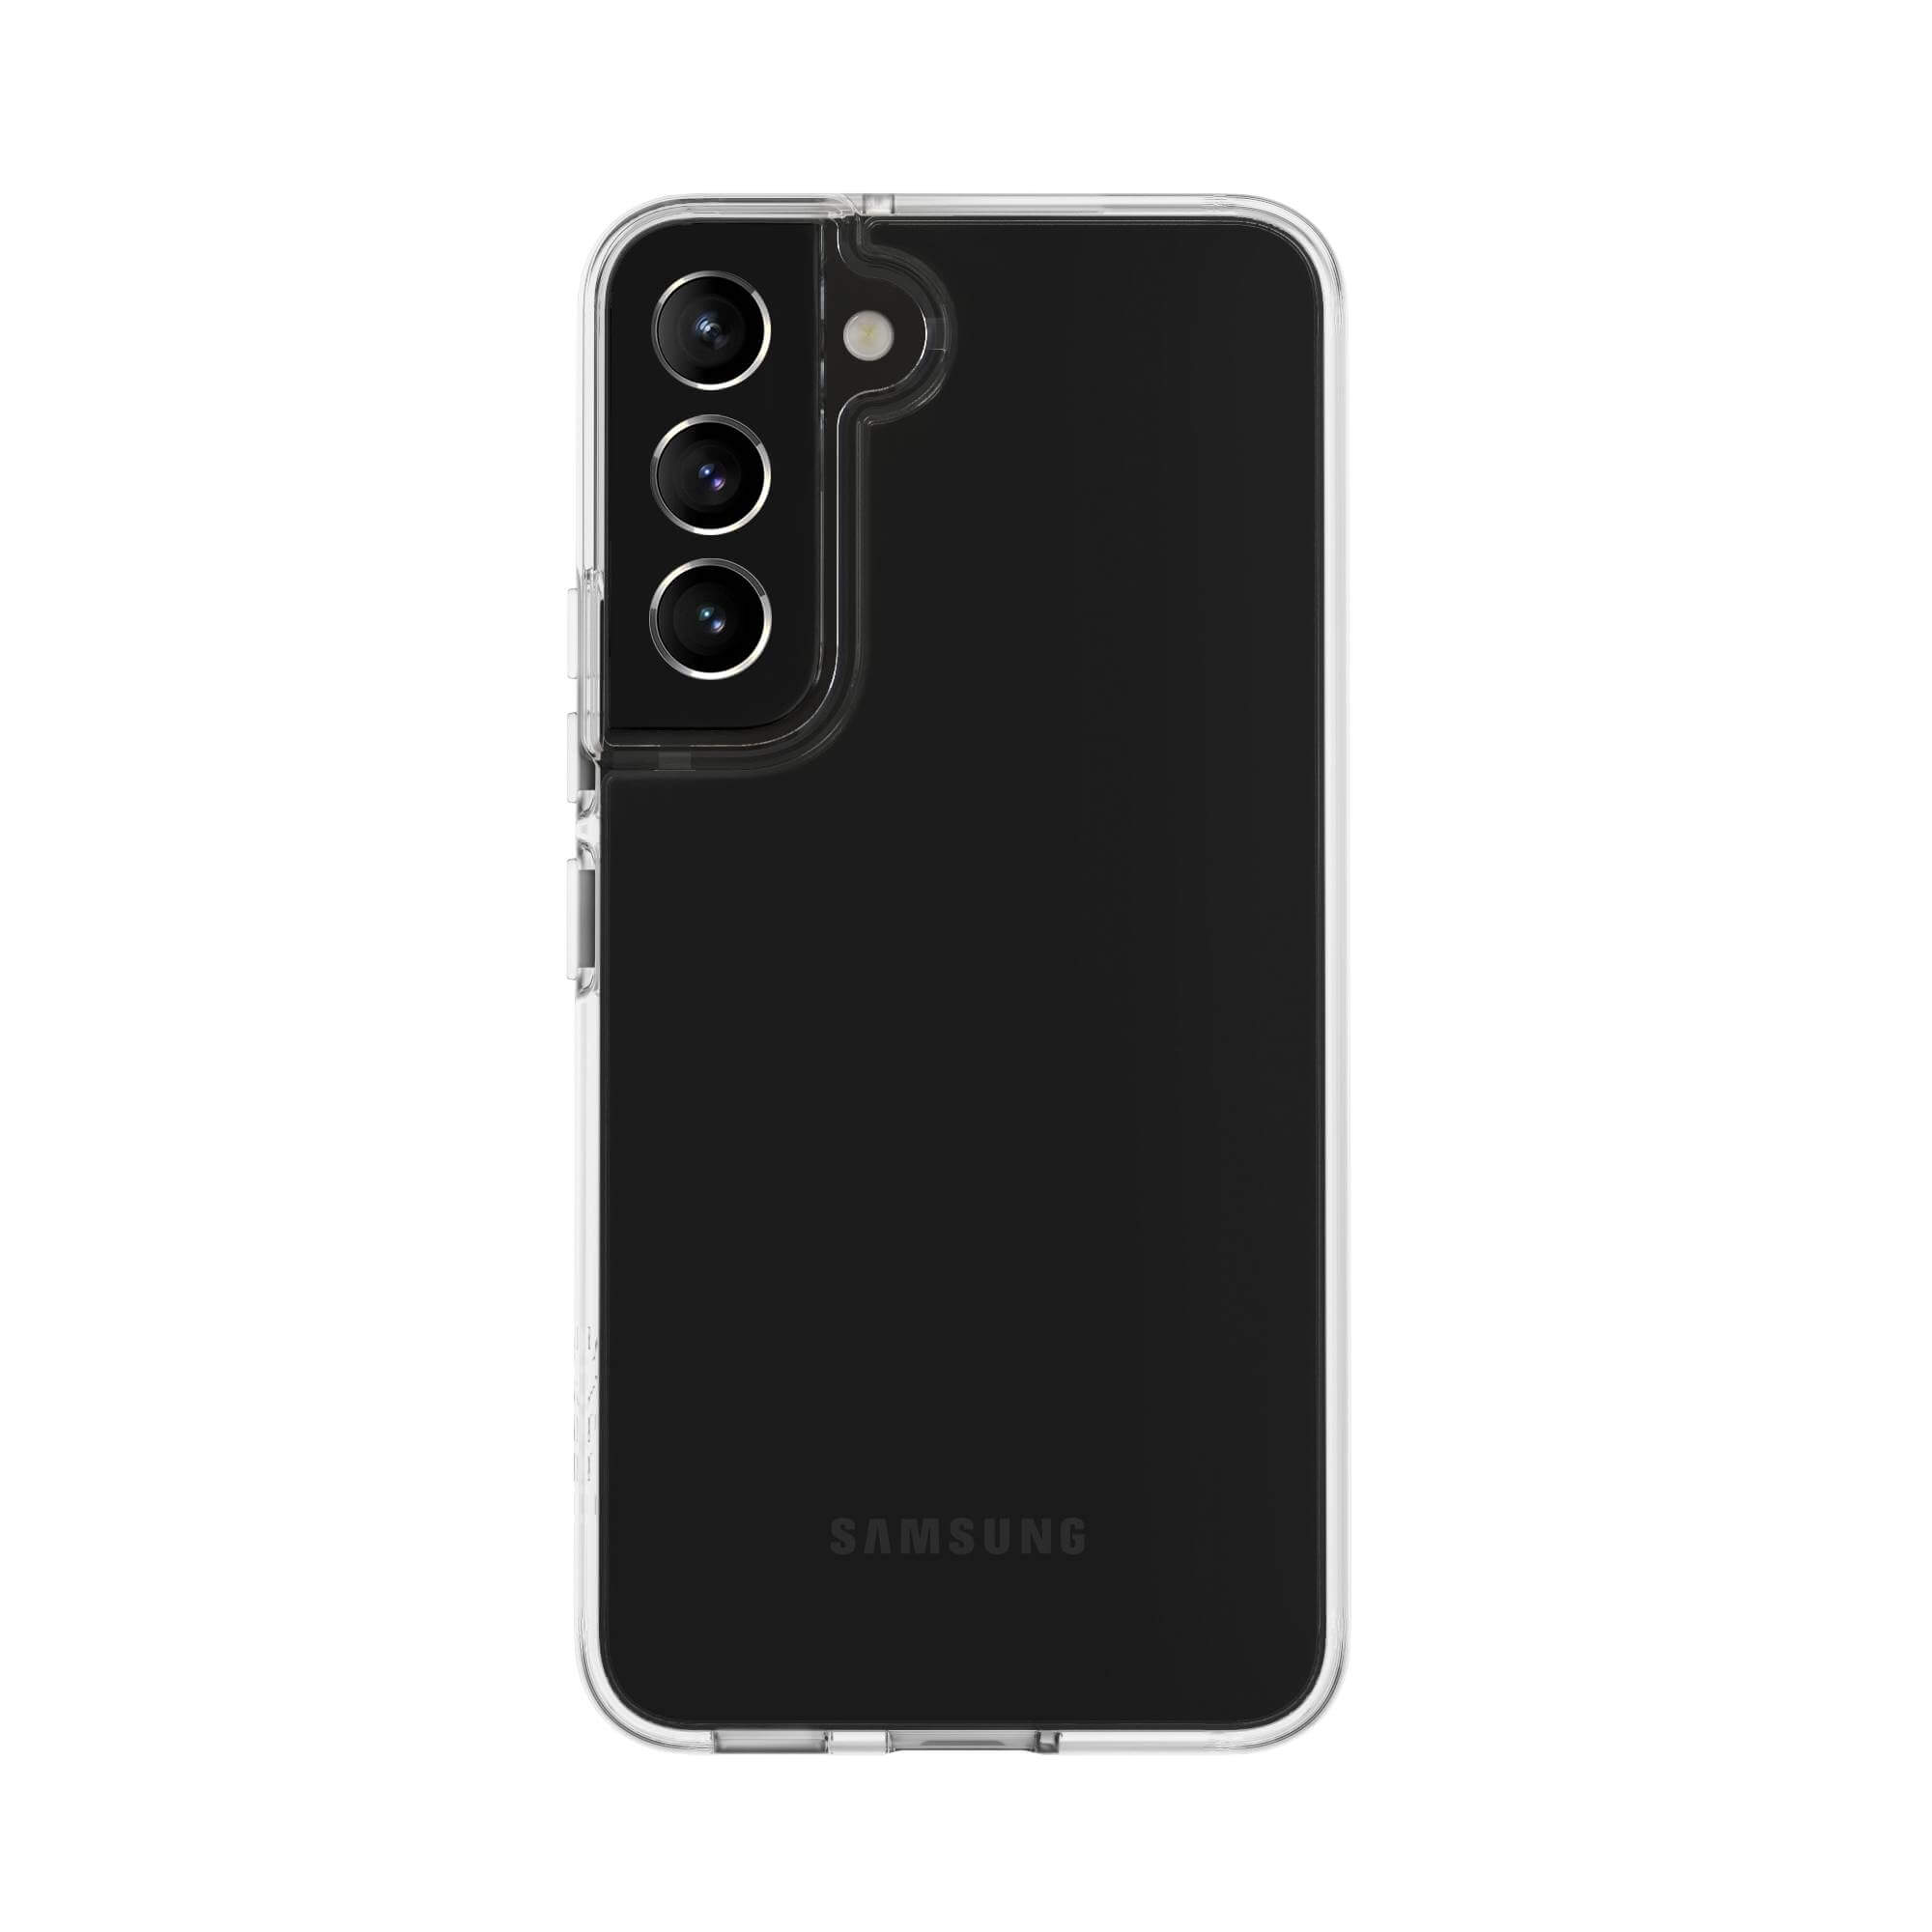 Galaxy SKECH Crystal, S22+ Backcover, transparent 5G, Samsung,